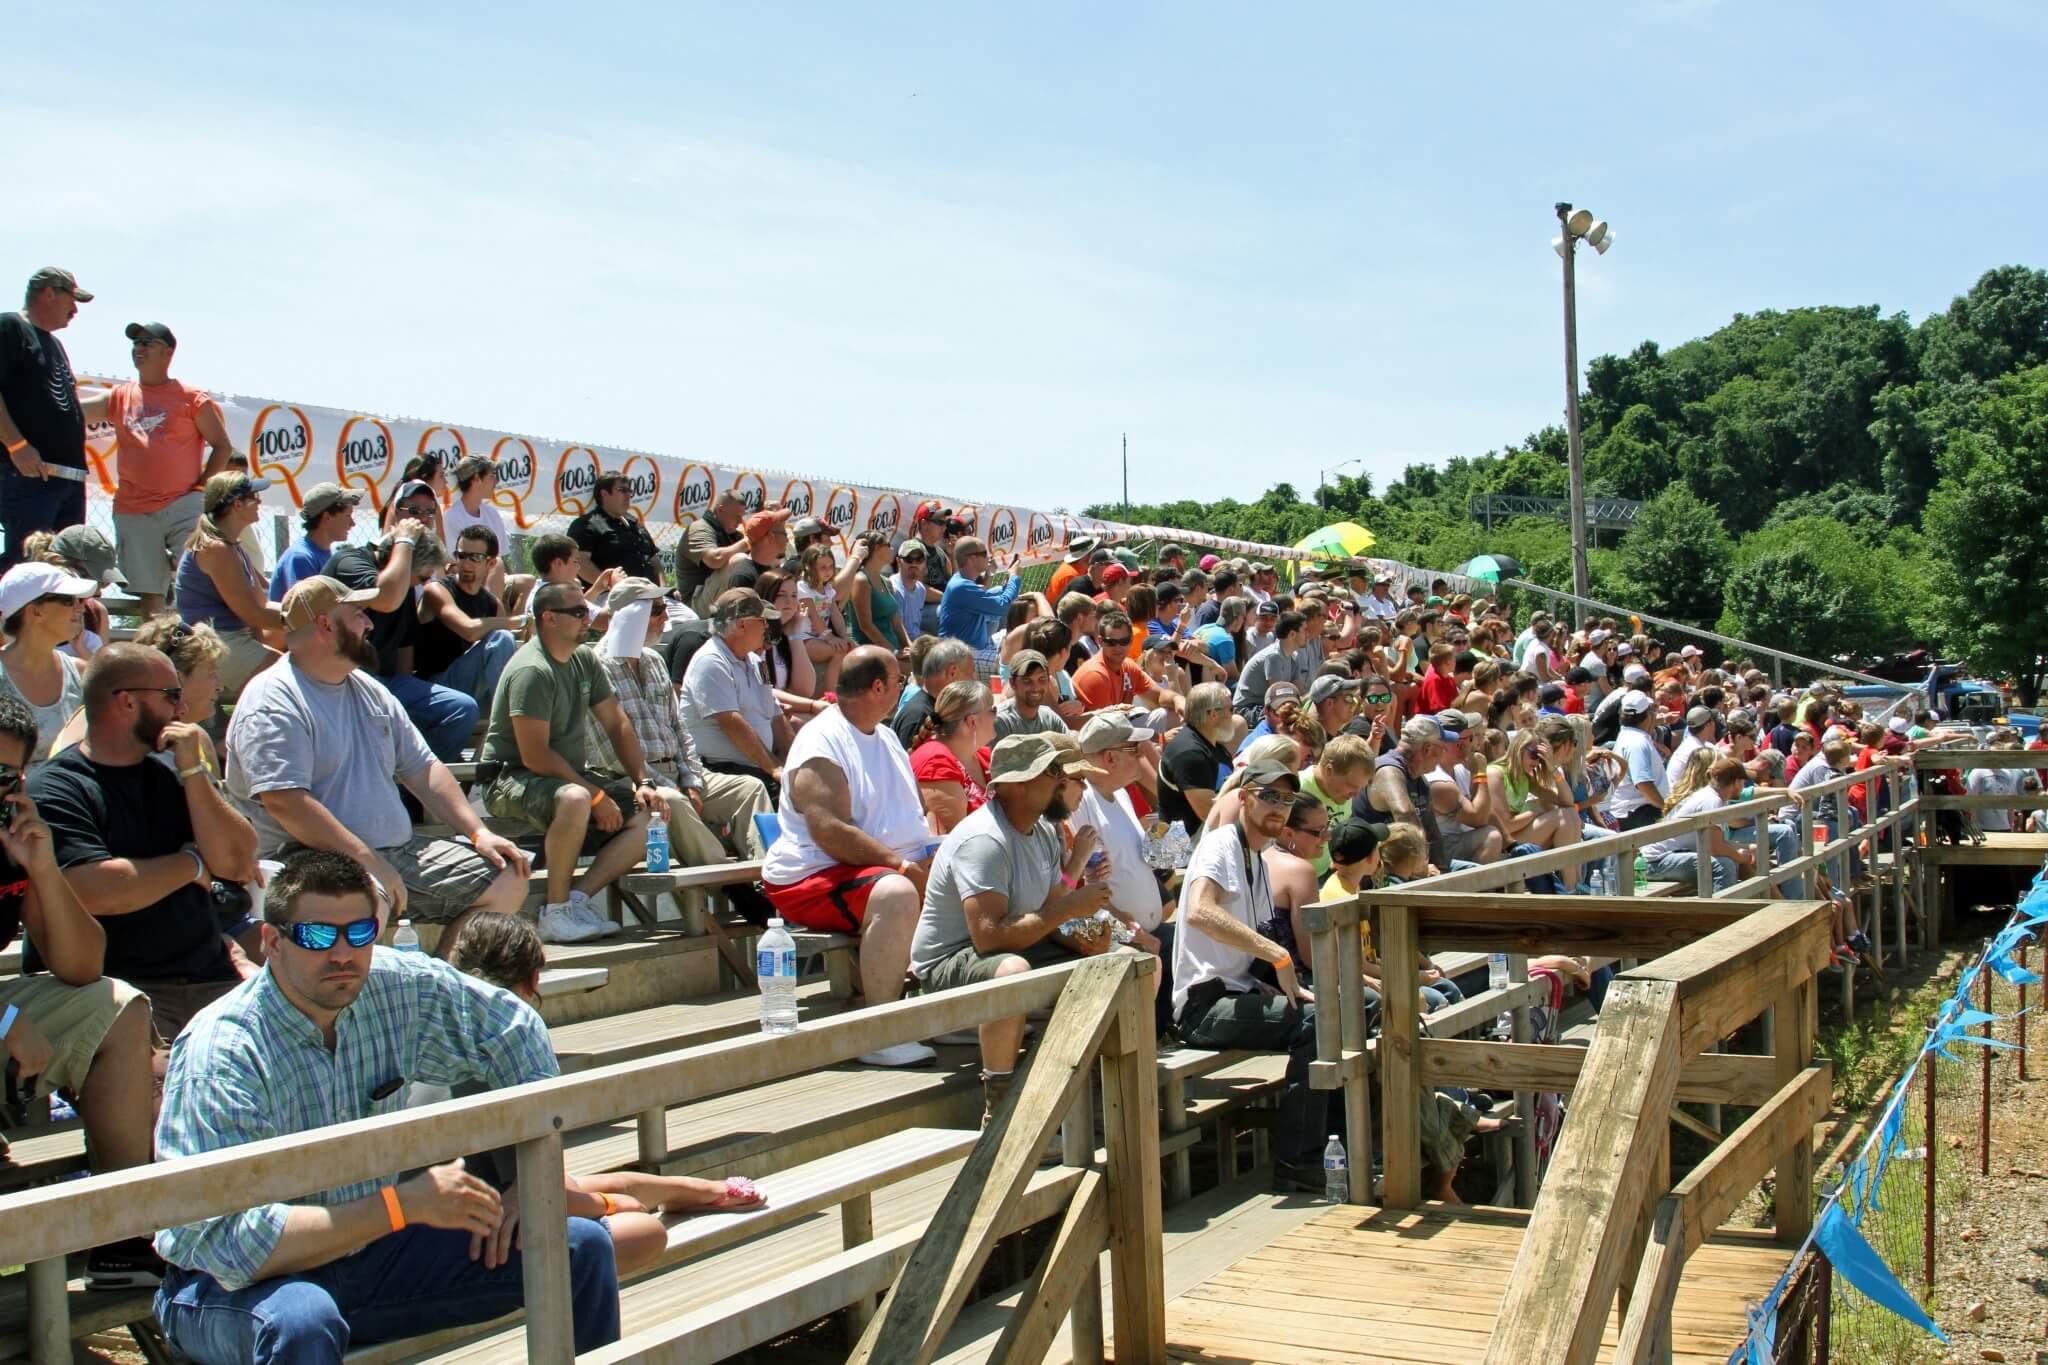 The main grandstands at the track were full from the time the dirt drags started through the end of the pull.